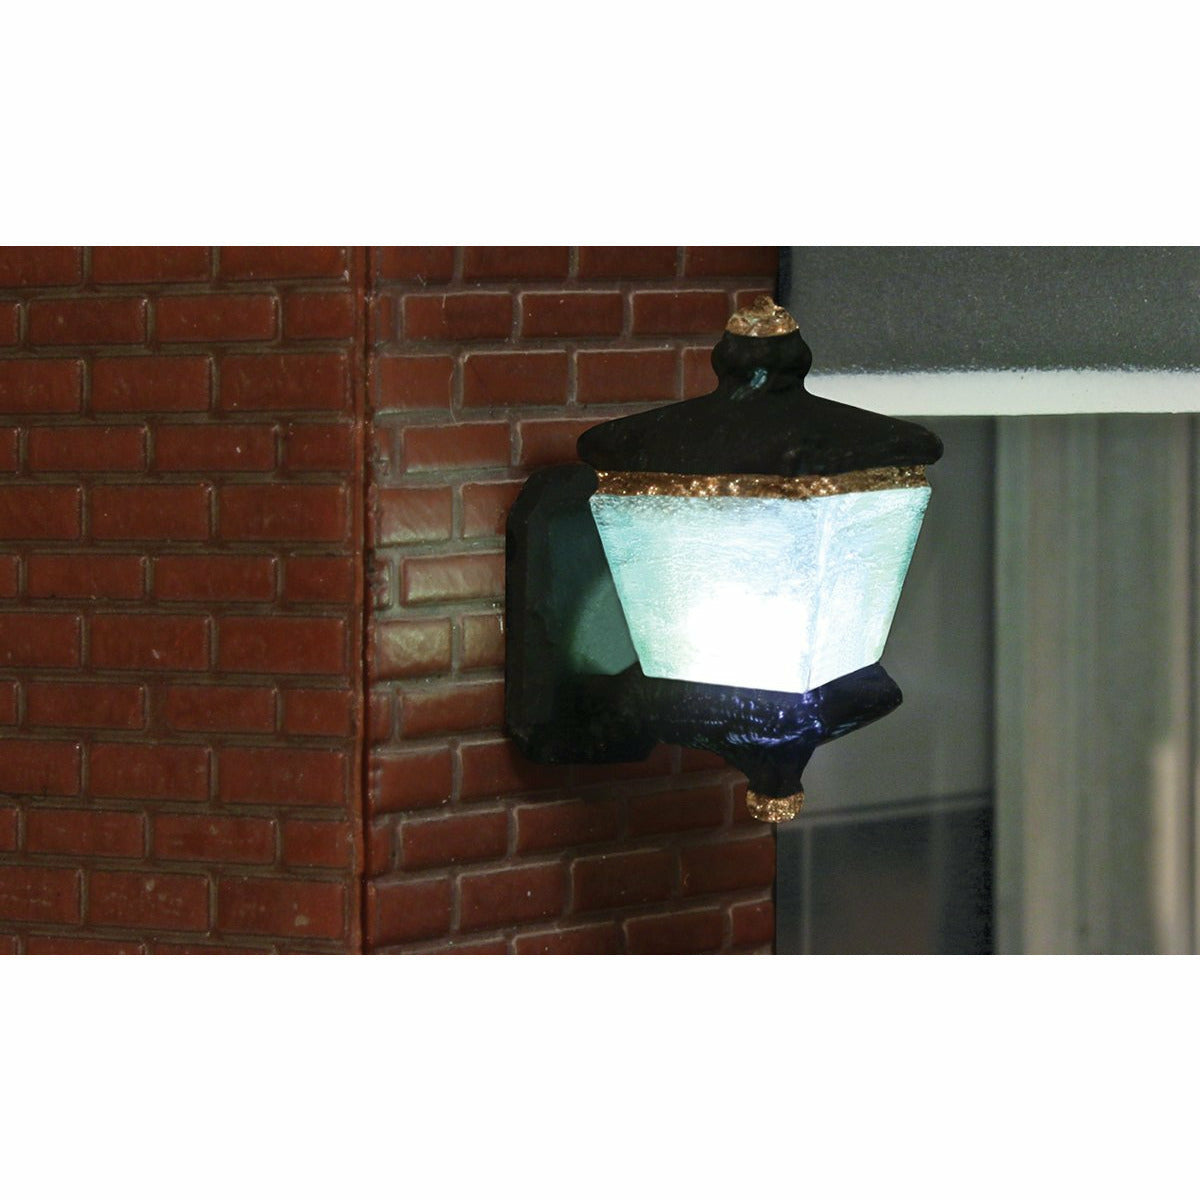 WOODLAND SCENICS N Entry Wall Mount Lights